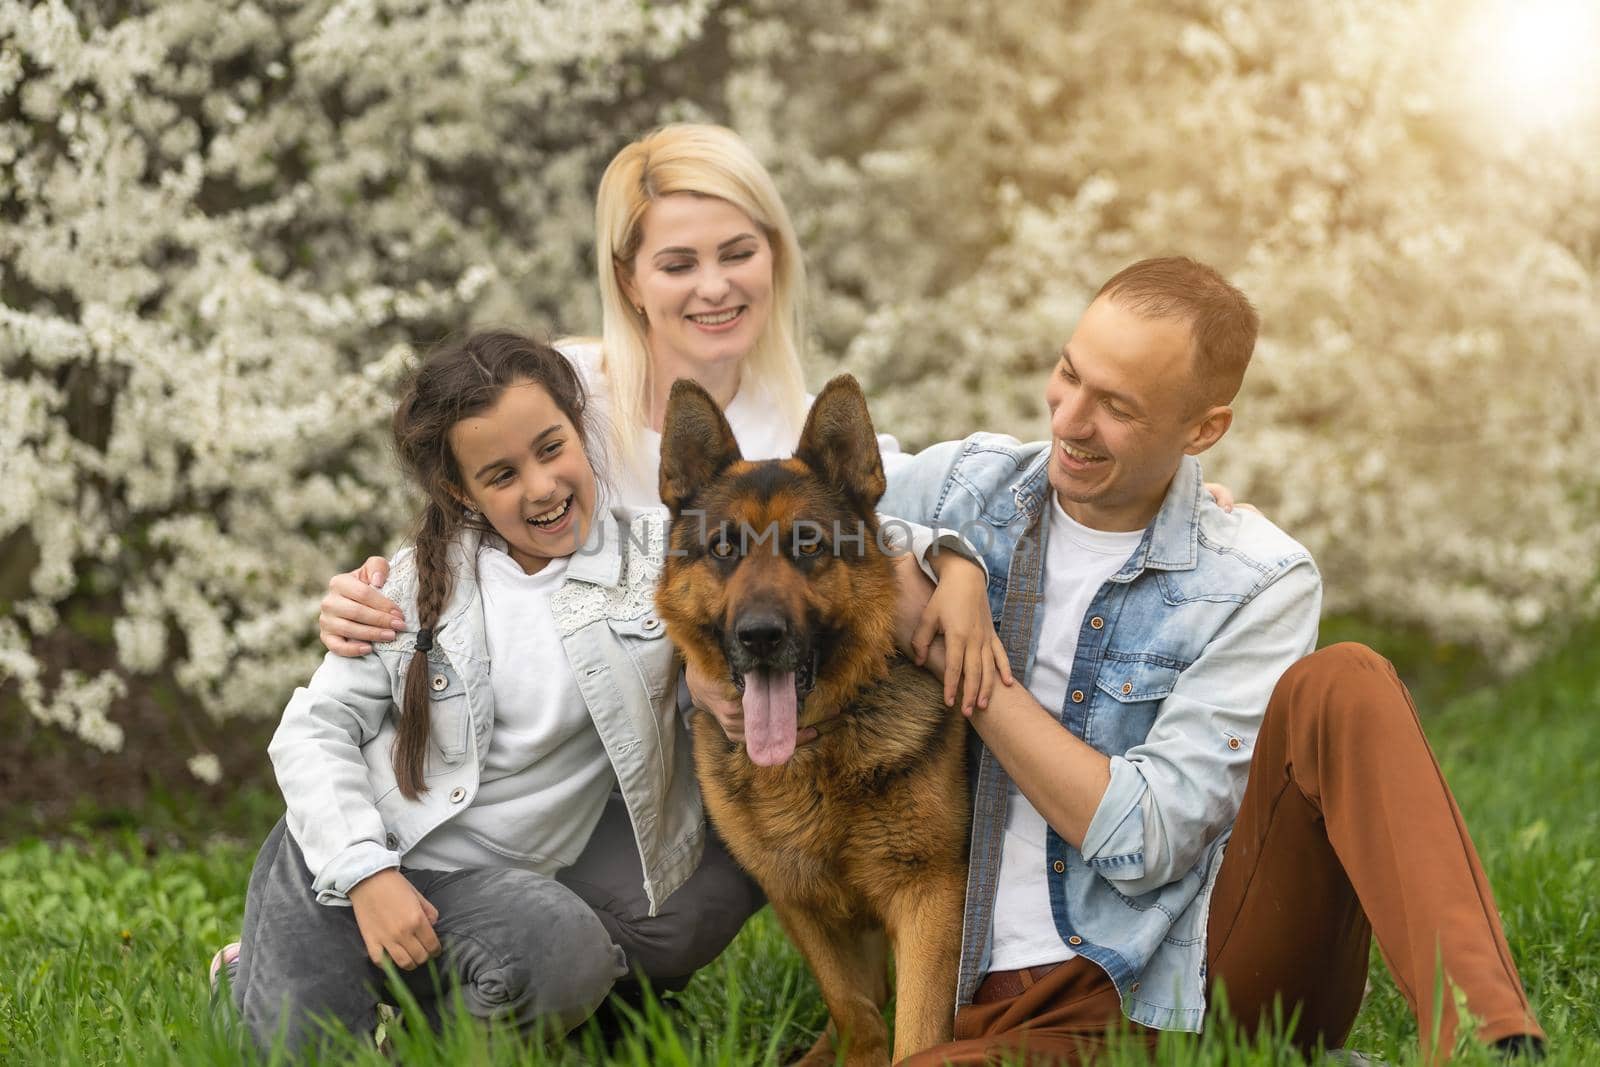 Happy family outdoors spending time together. Father, mother and daughter are having fun on a green floral grass